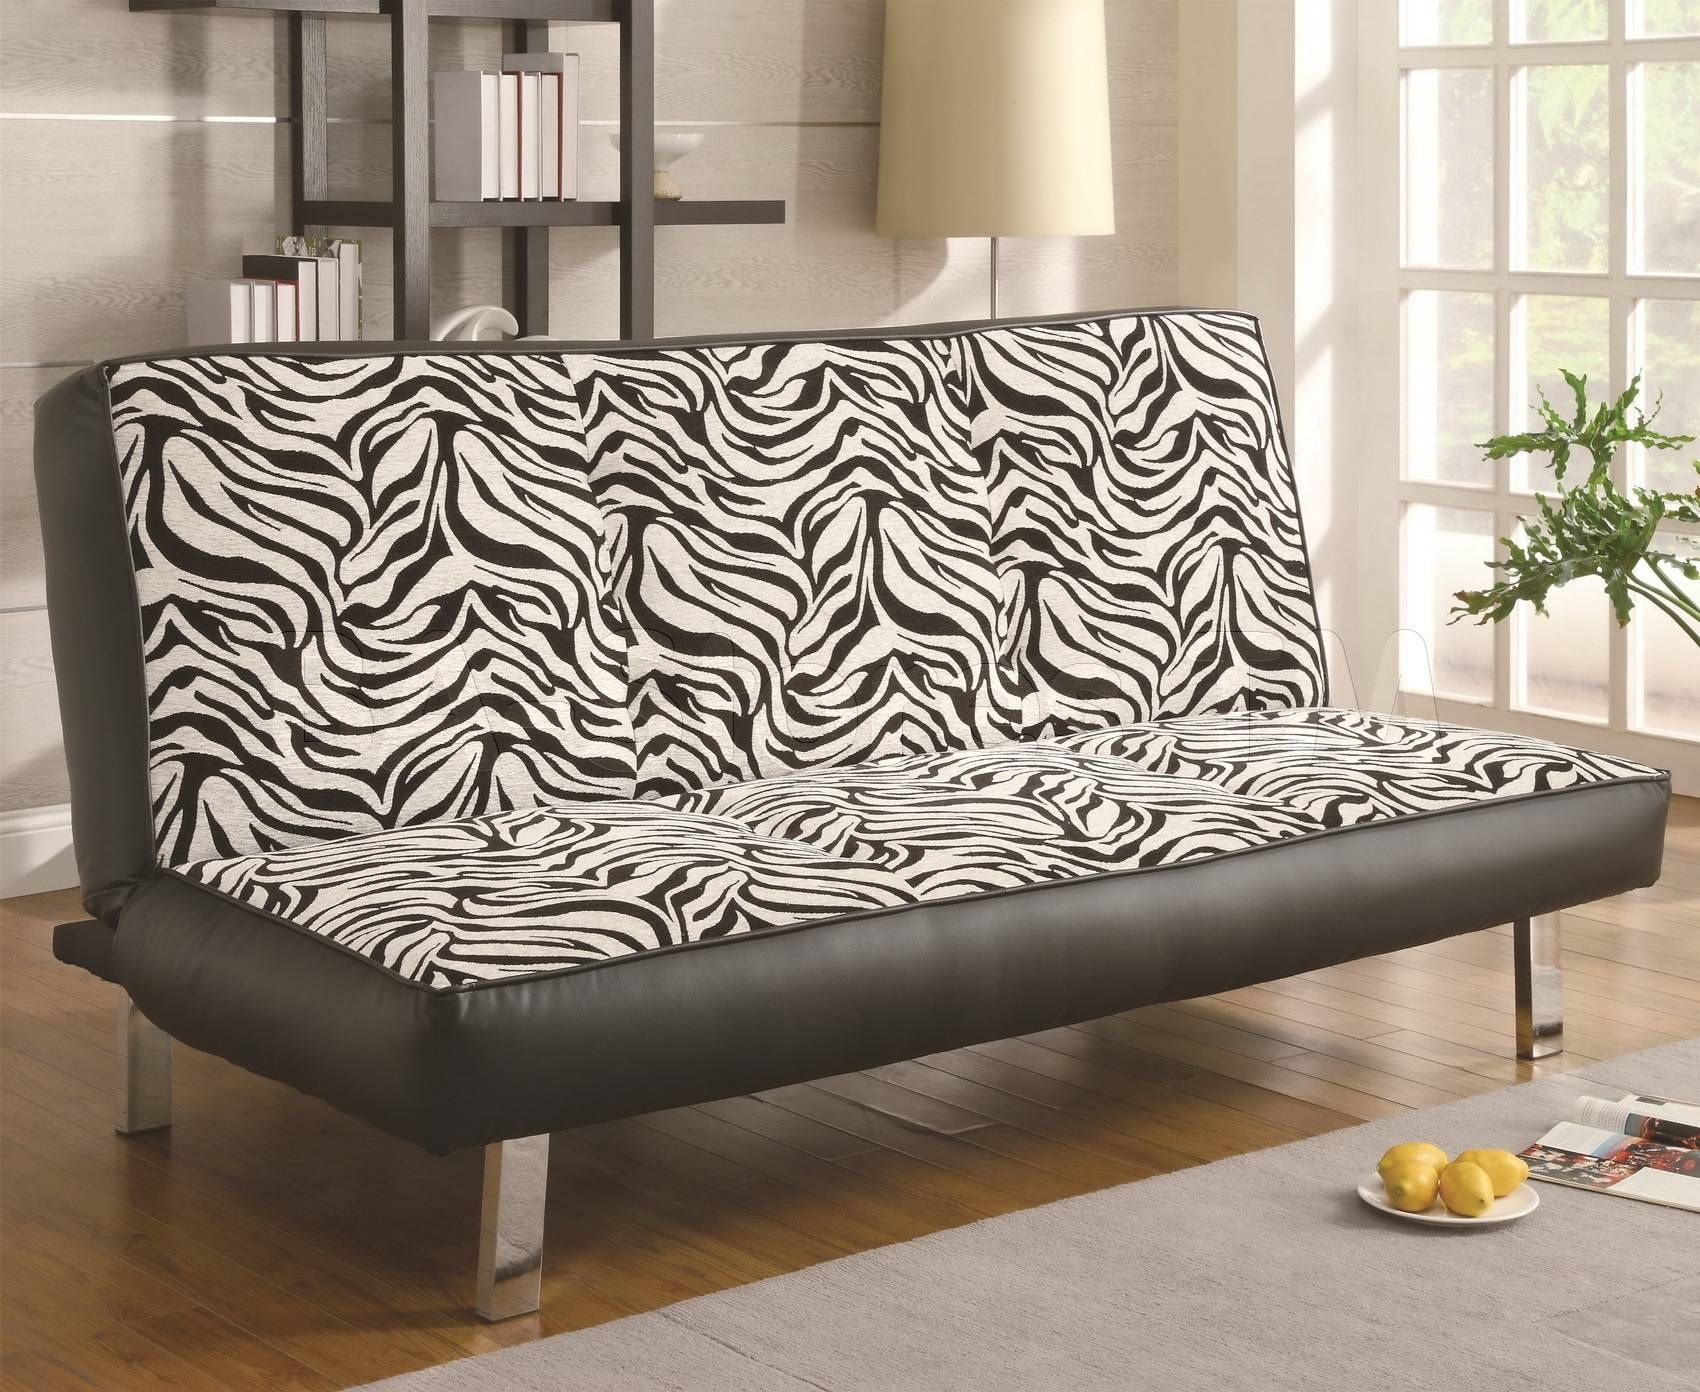 Sitting Pretty: 6 Sofa Bed Designs To Complete Your Living Room Inside Animal Print Sofas (View 8 of 15)